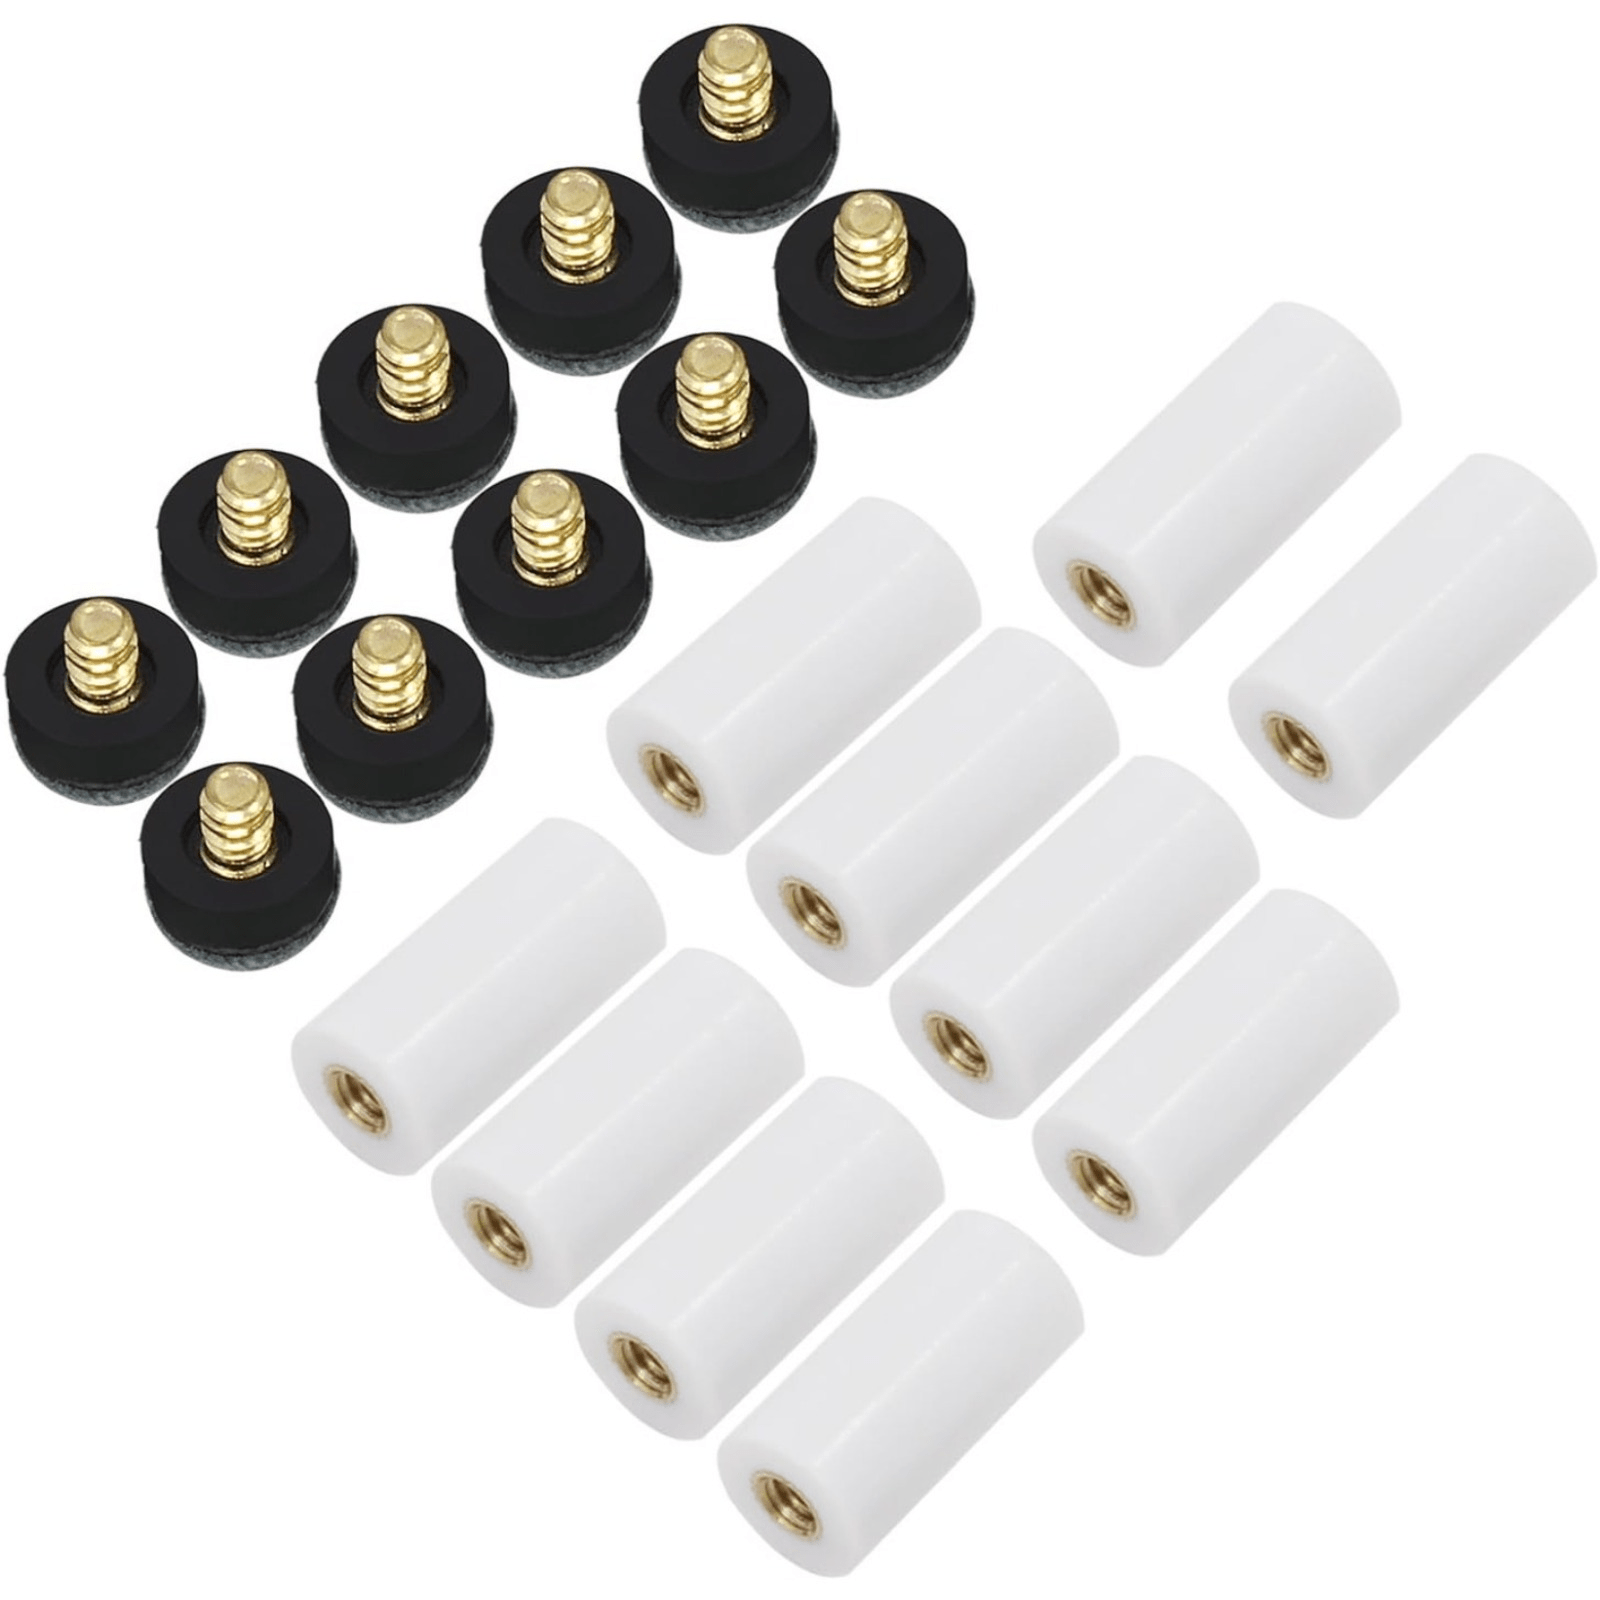 

10pcs 12mm Soft Billiard Cue Tips Replacement, Pool Cue Stick Ferrules - Screw-on Tips